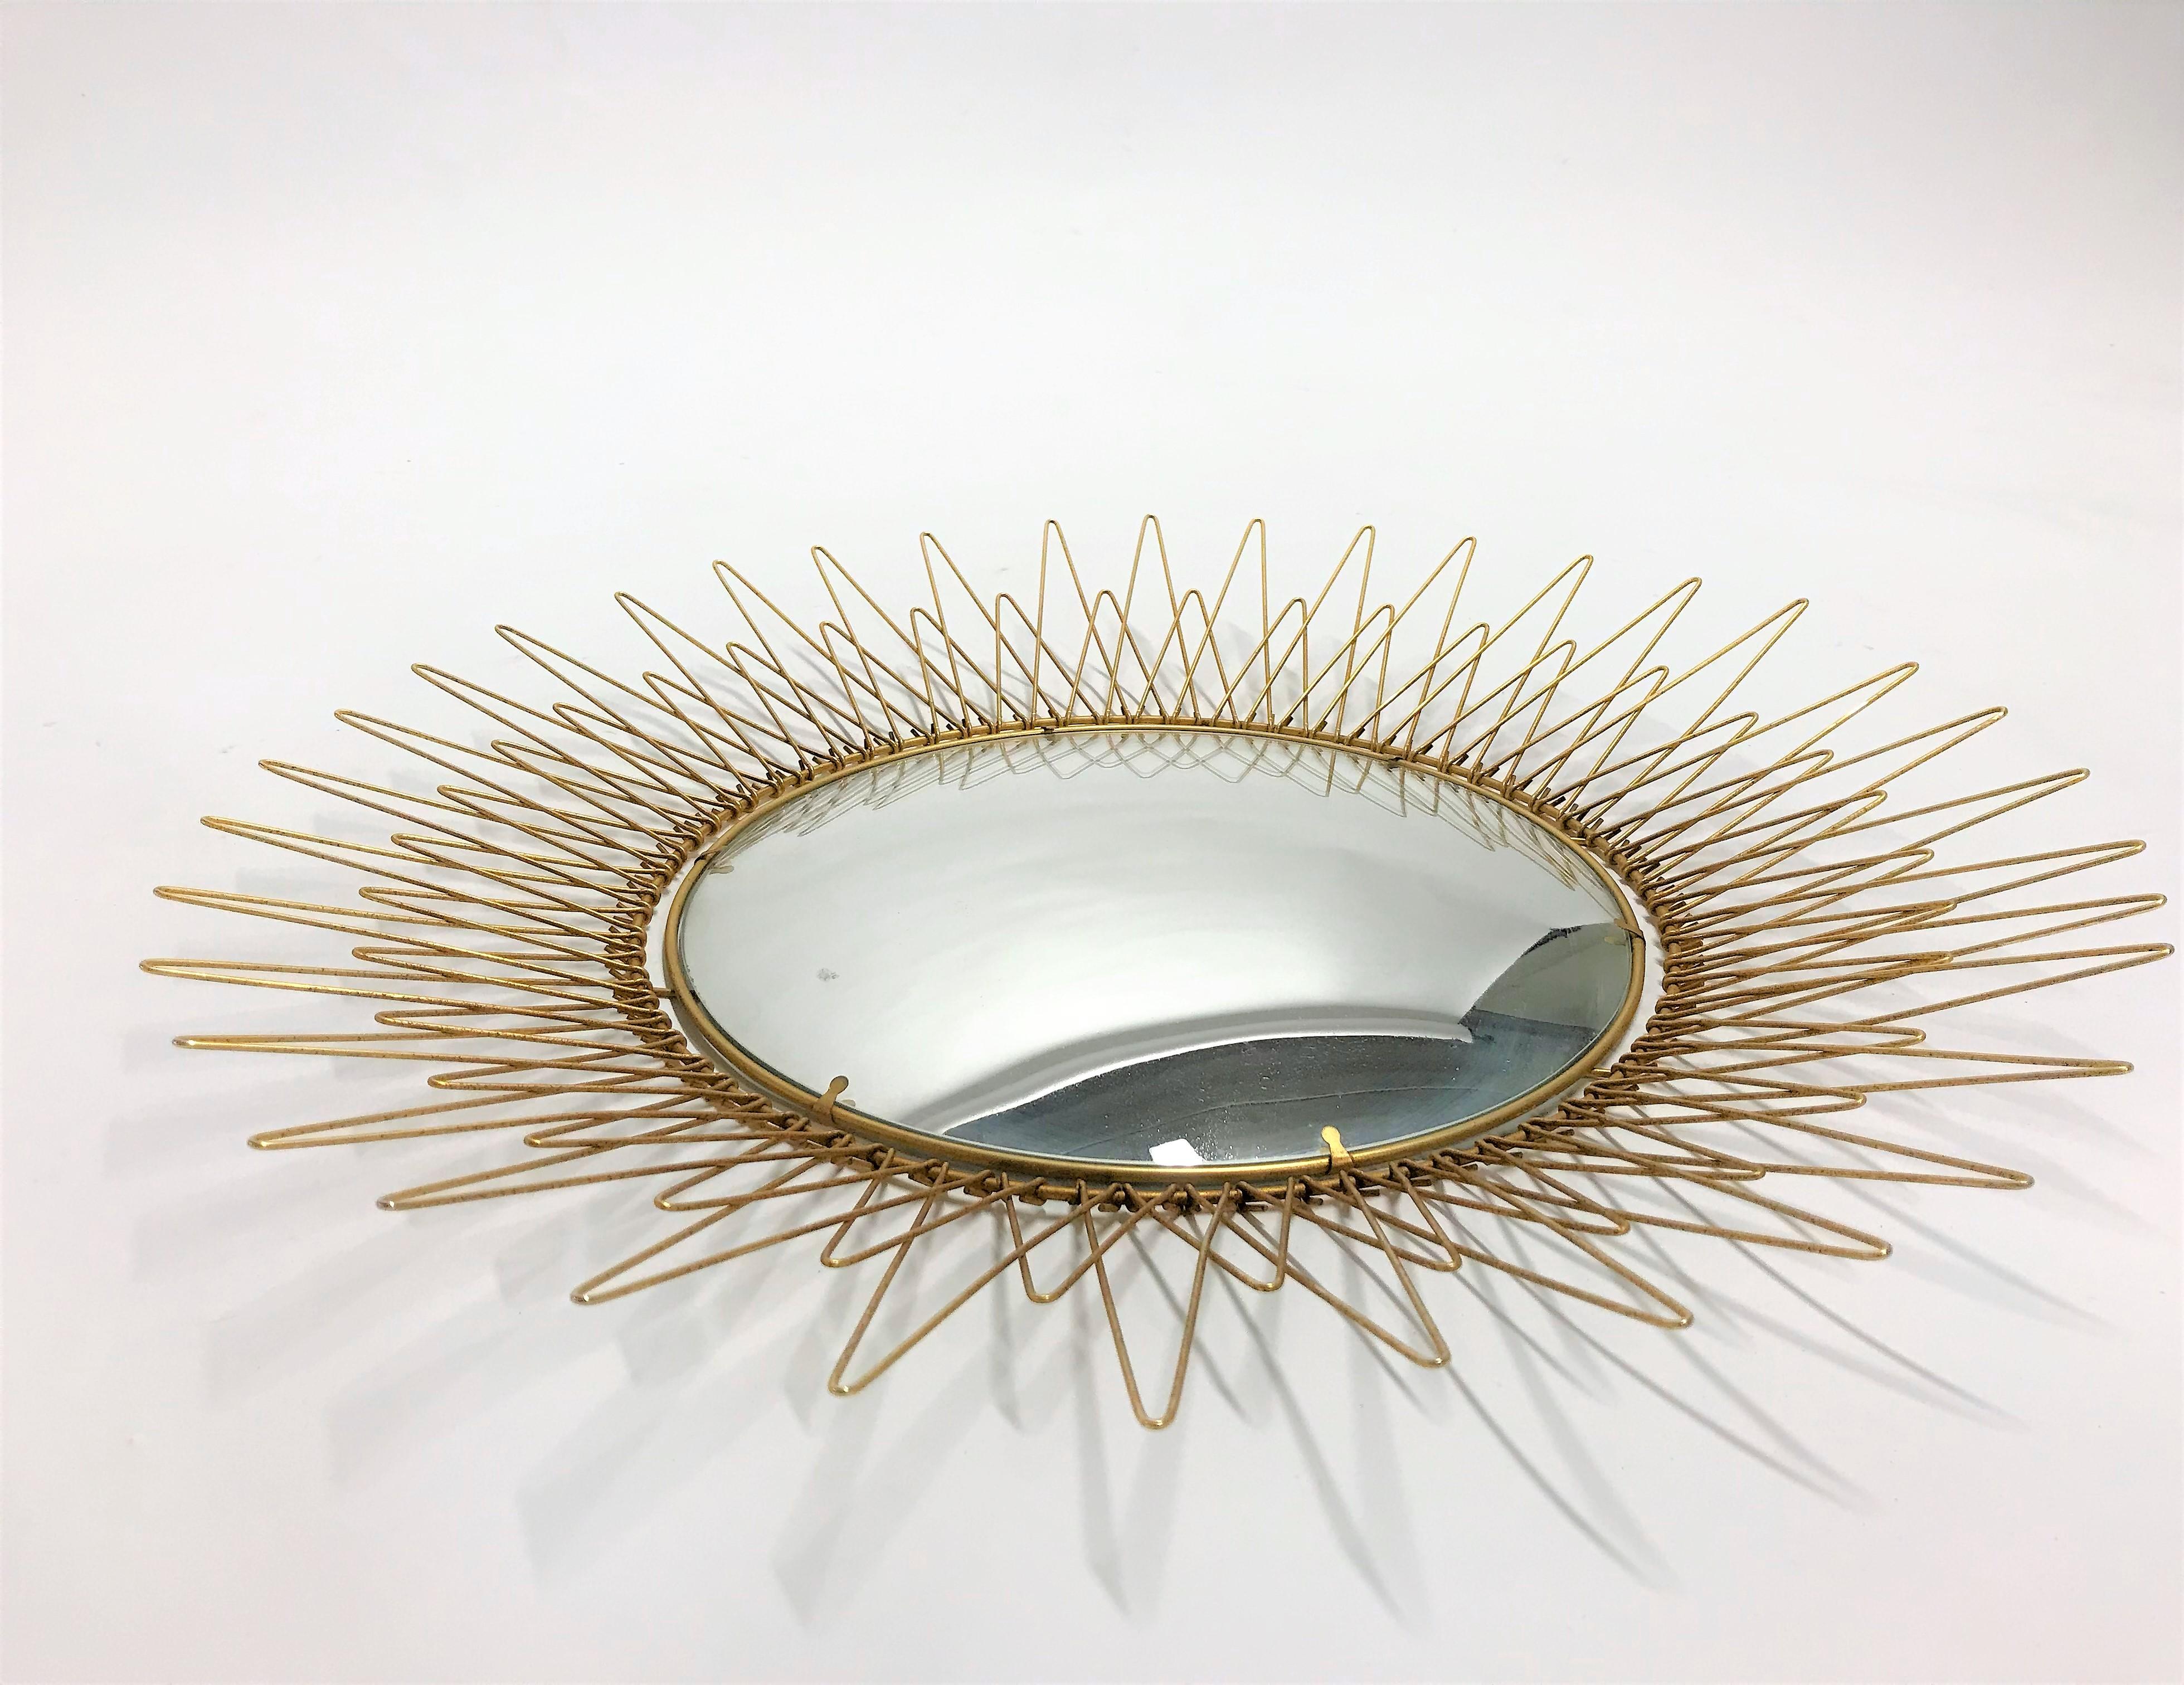 Metal sunburst mirror with convex mirror glass.

The golden mirror is in a very good condition.

1960s - made in Belgium.

Dimensions:
Diameter: 57 cm/ 22.5